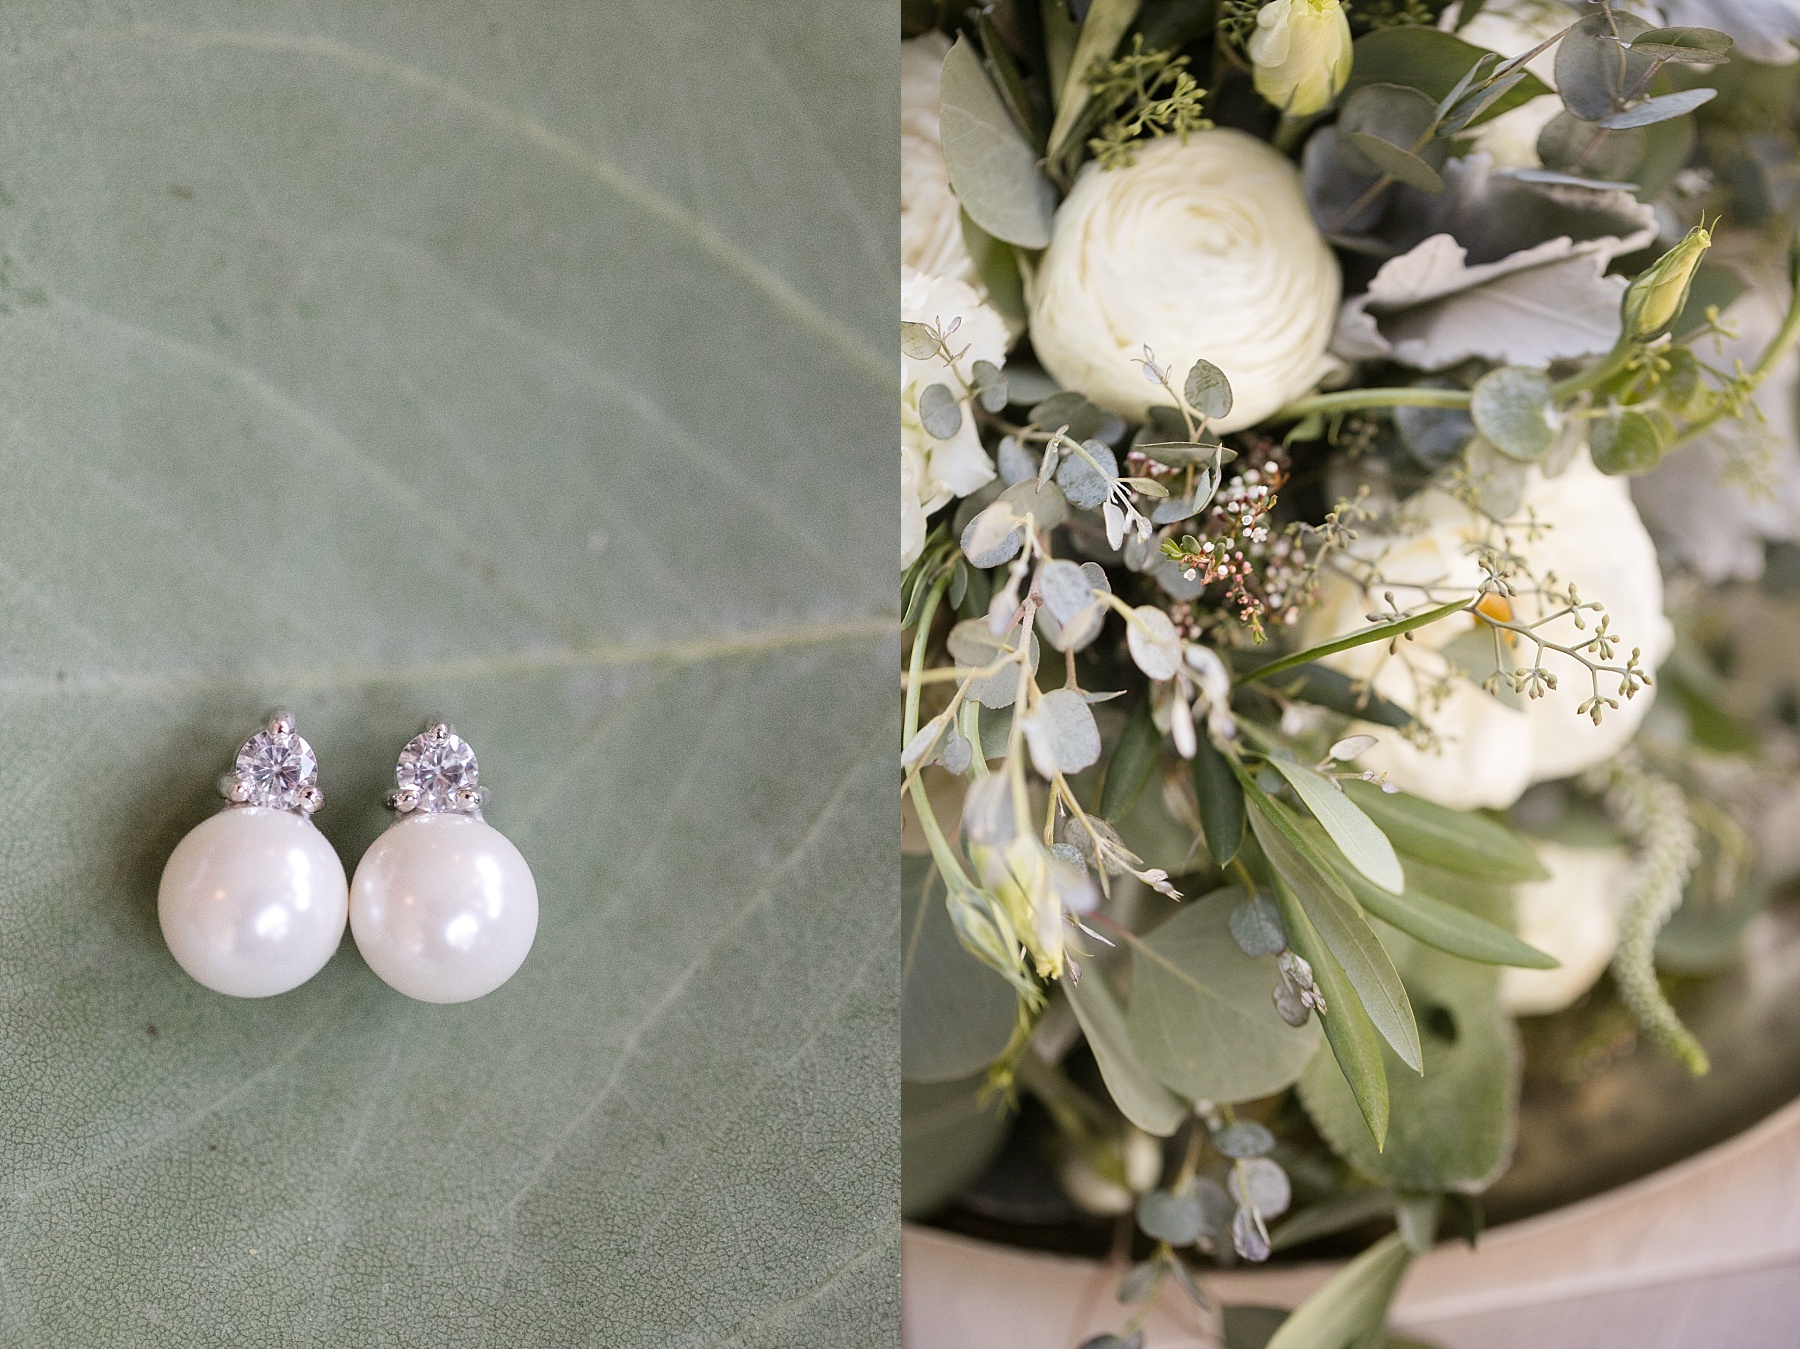 A eucalyptus filled wedding at The Florian Gardens in Eau Claire.